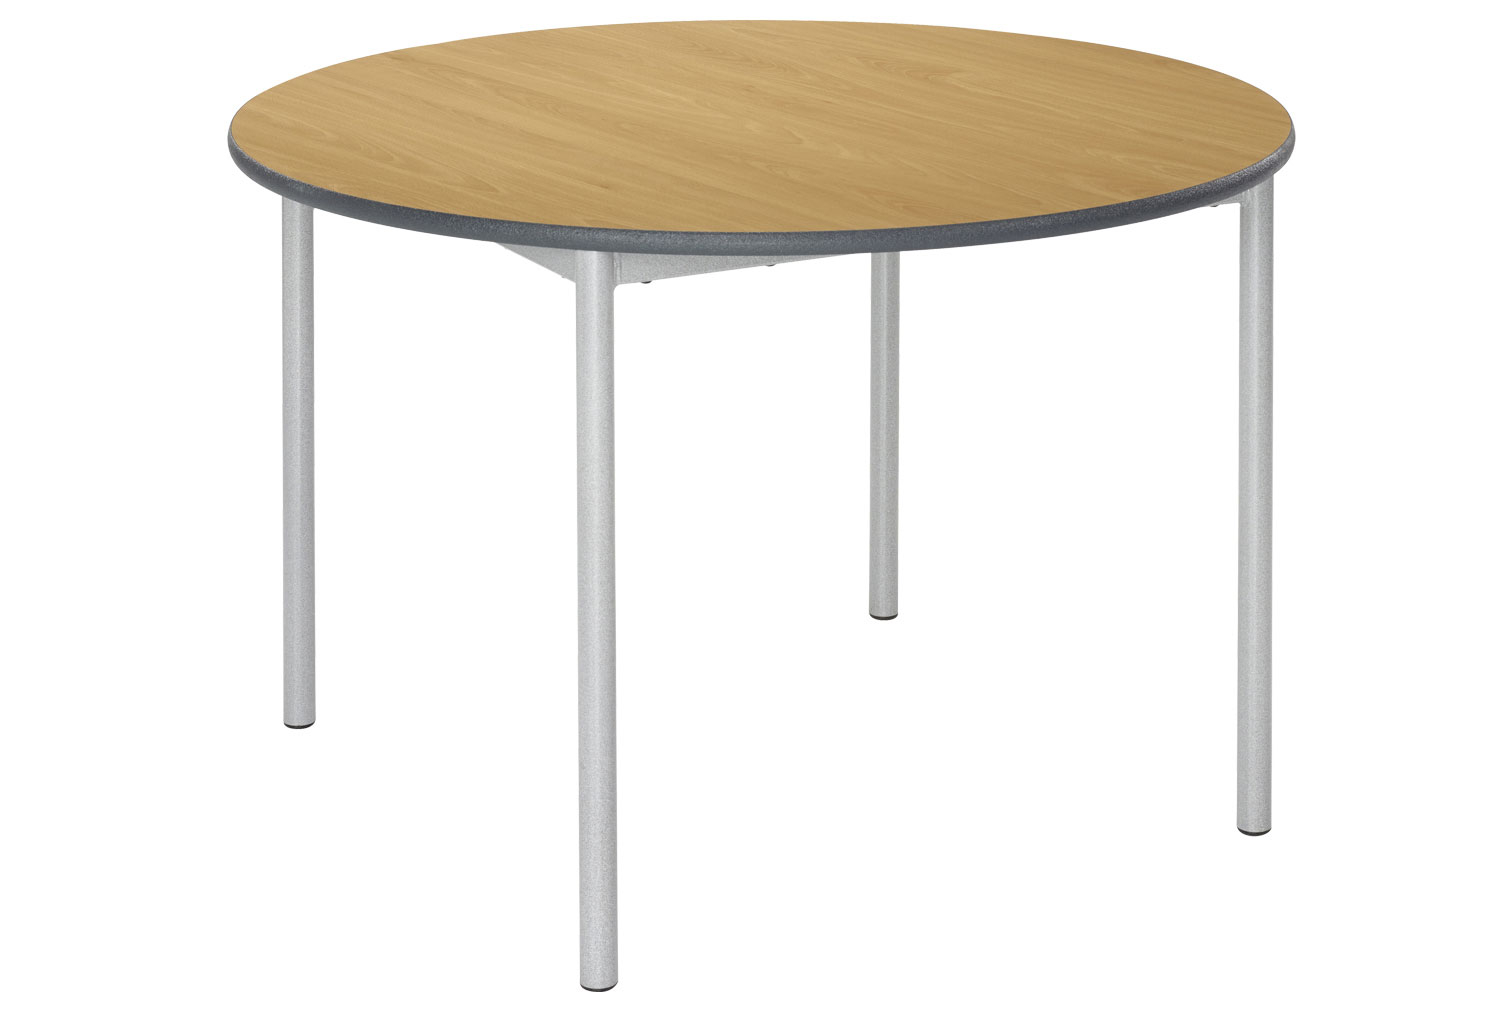 Qty 4 - RT32 Circular Classroom Tables 11-14 Years, 120diax71h (cm), Speckled Grey Frame, Beech Top, PU Charcoal Edge